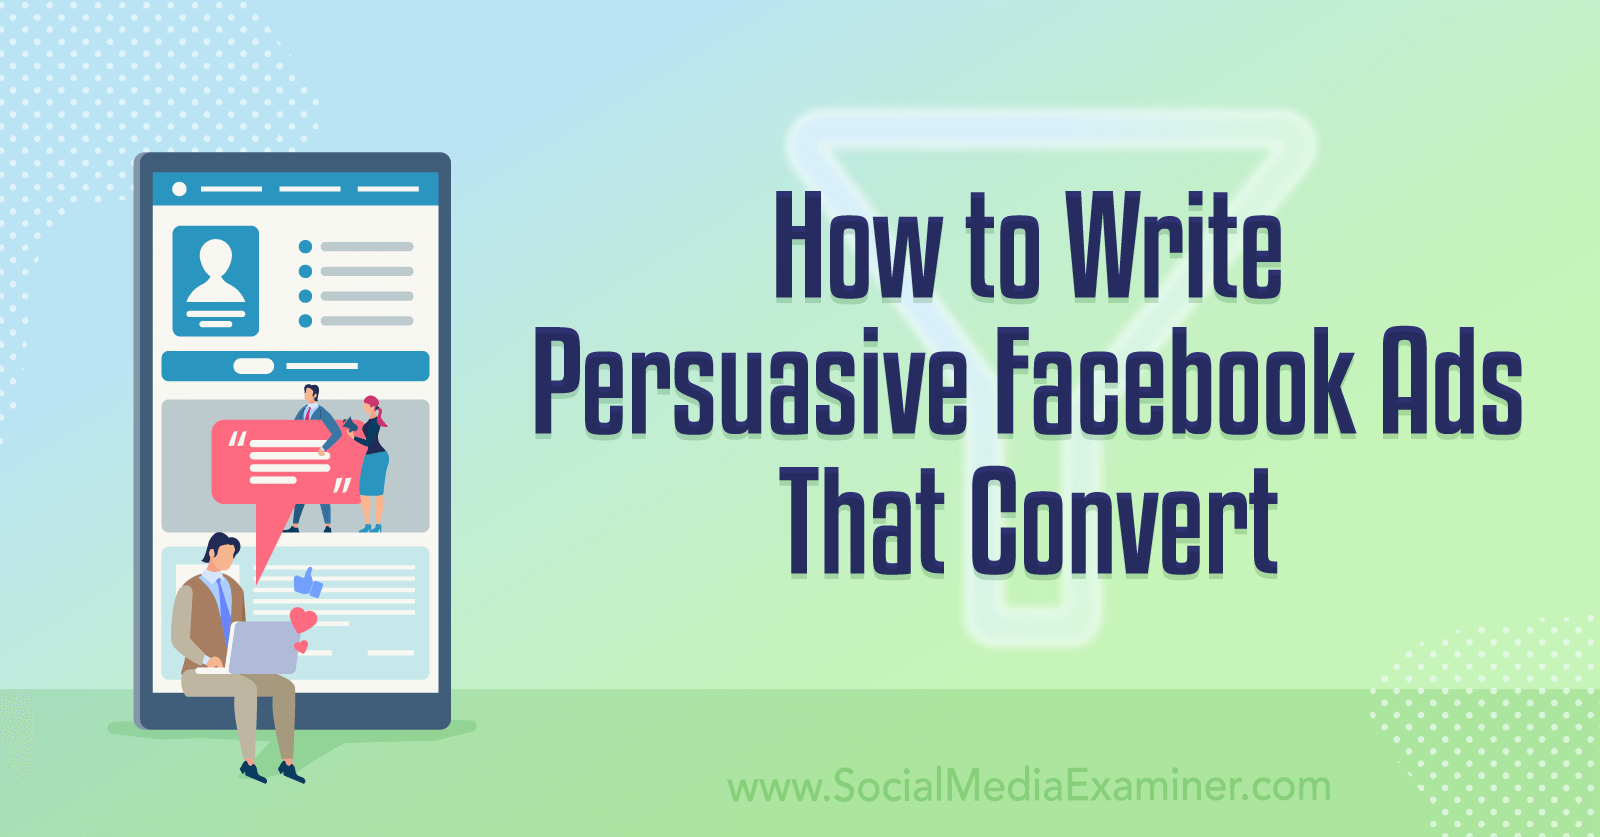 How to Write Persuasive Facebook Ads That Convert by Social Media Examiner